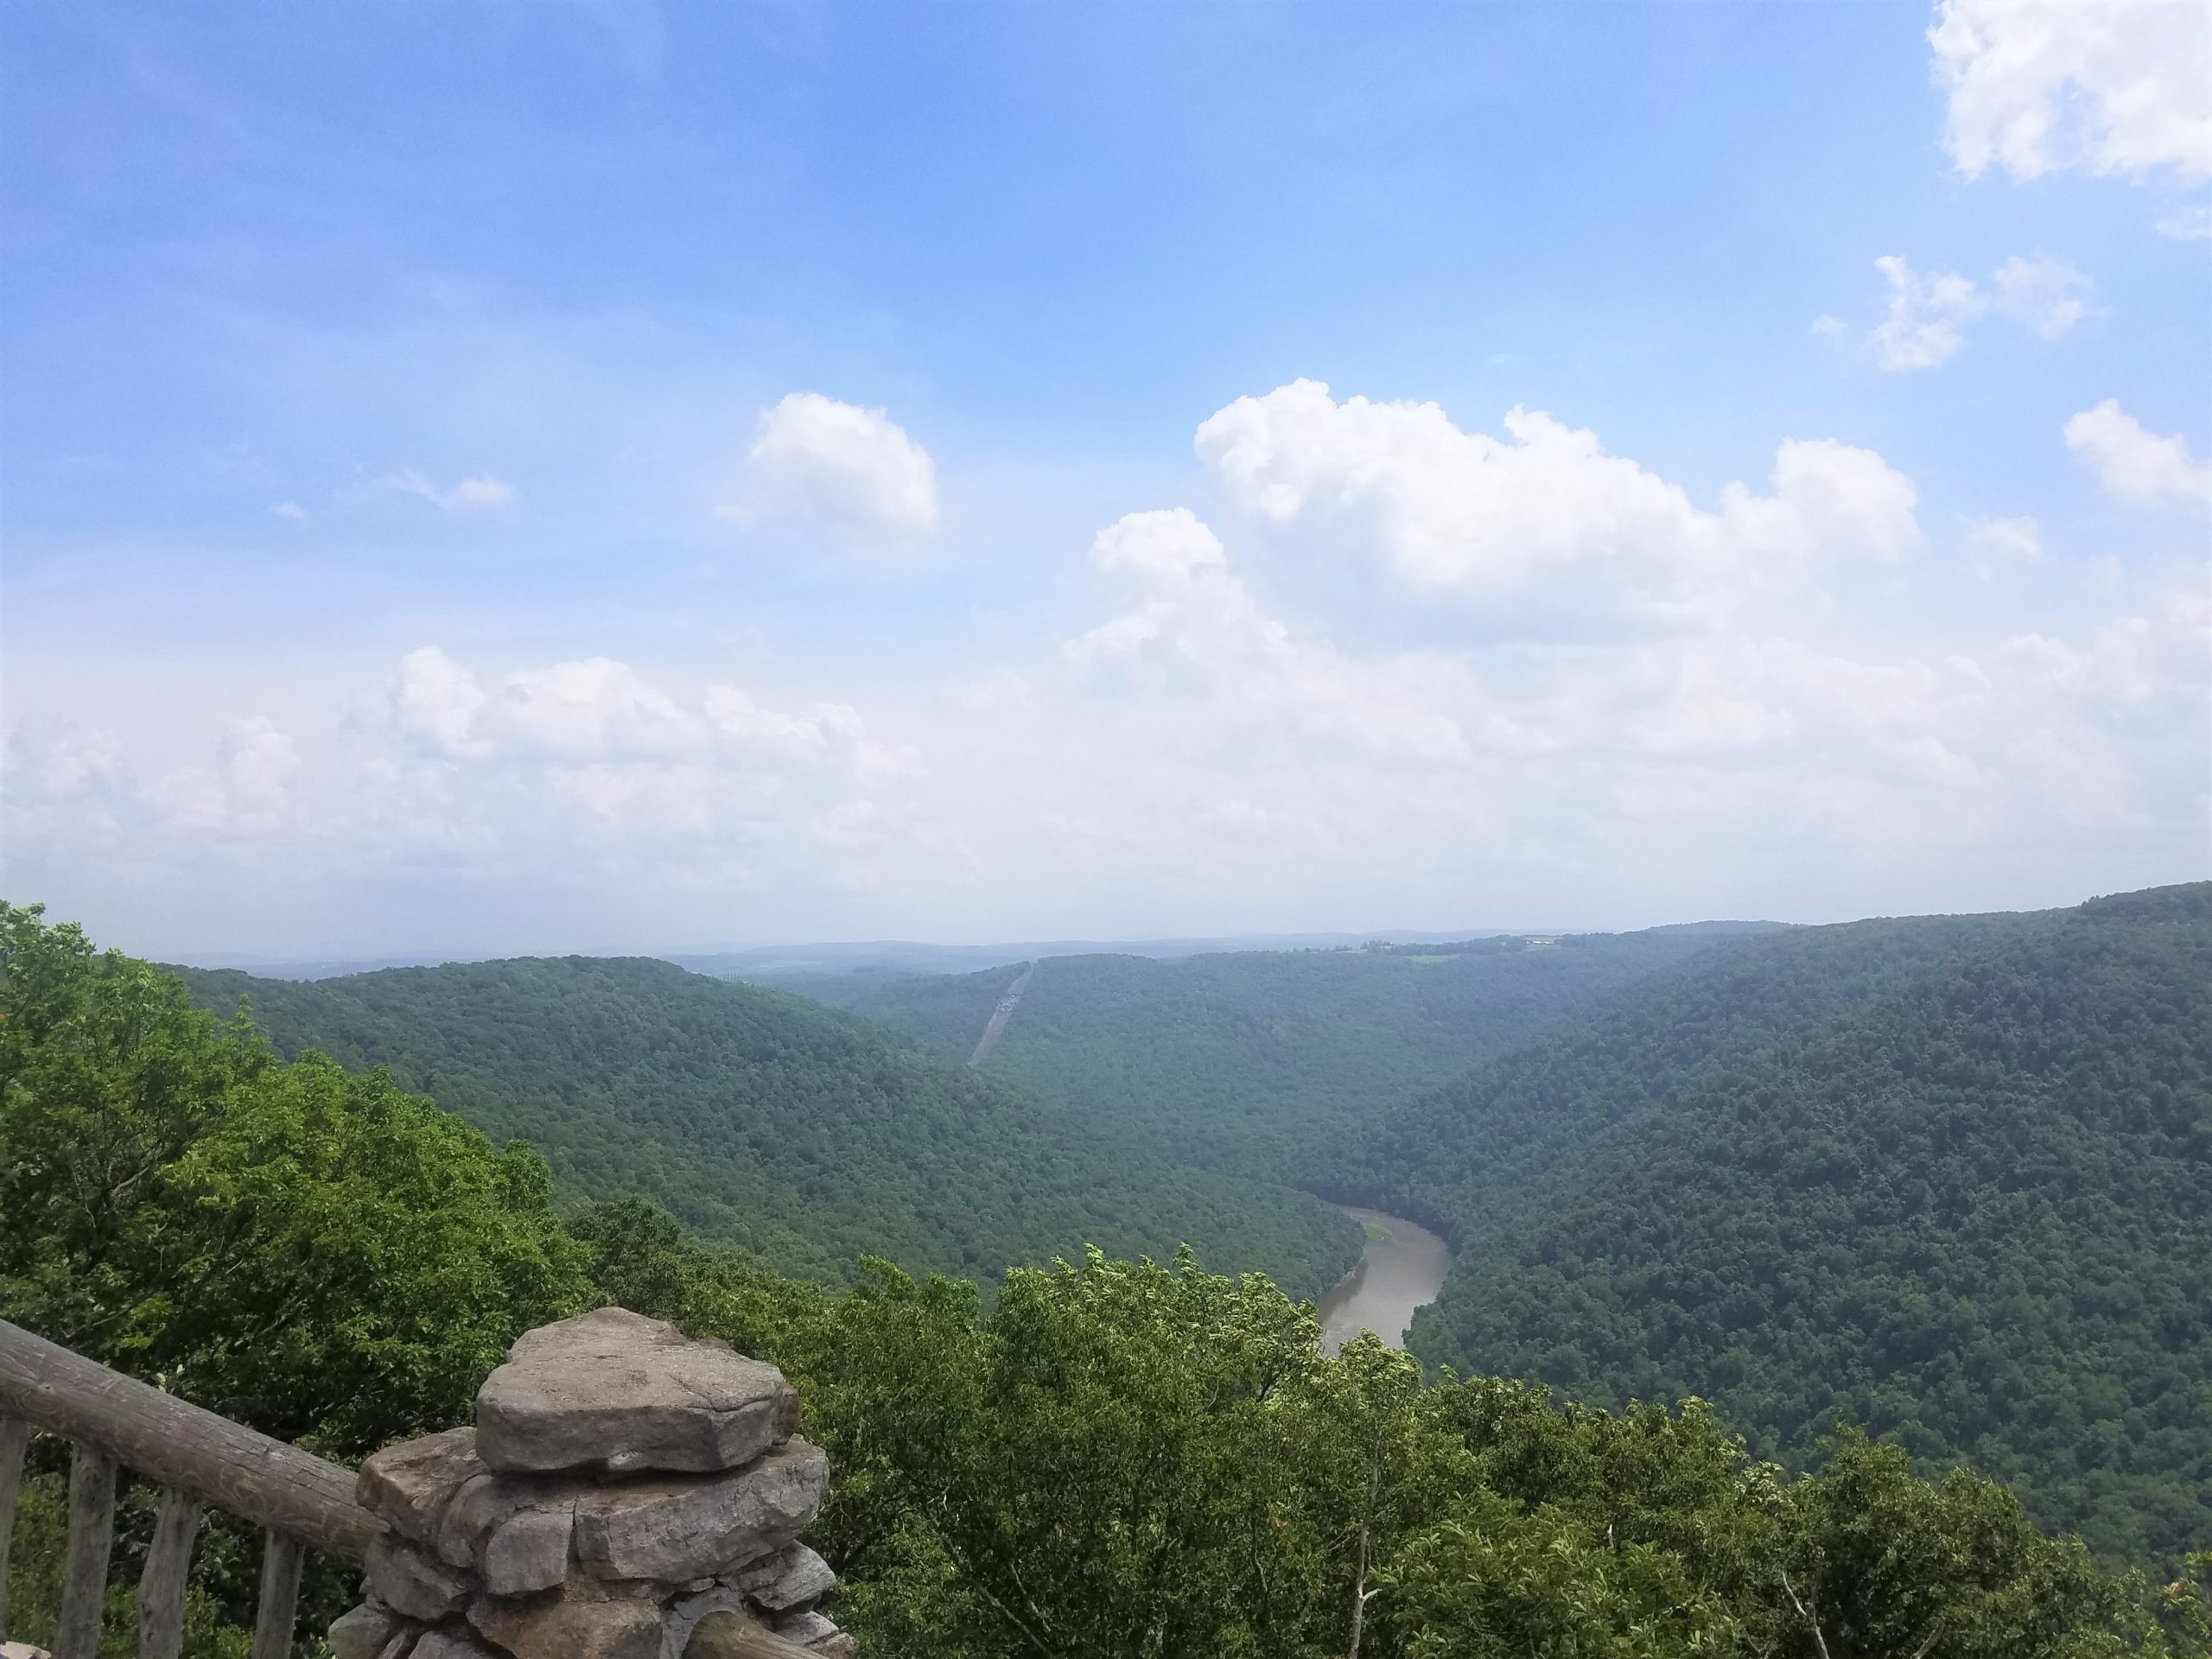 Coopers Rock Overlook offers a beautiful view deep into the heart of the Cheat River Canyon.